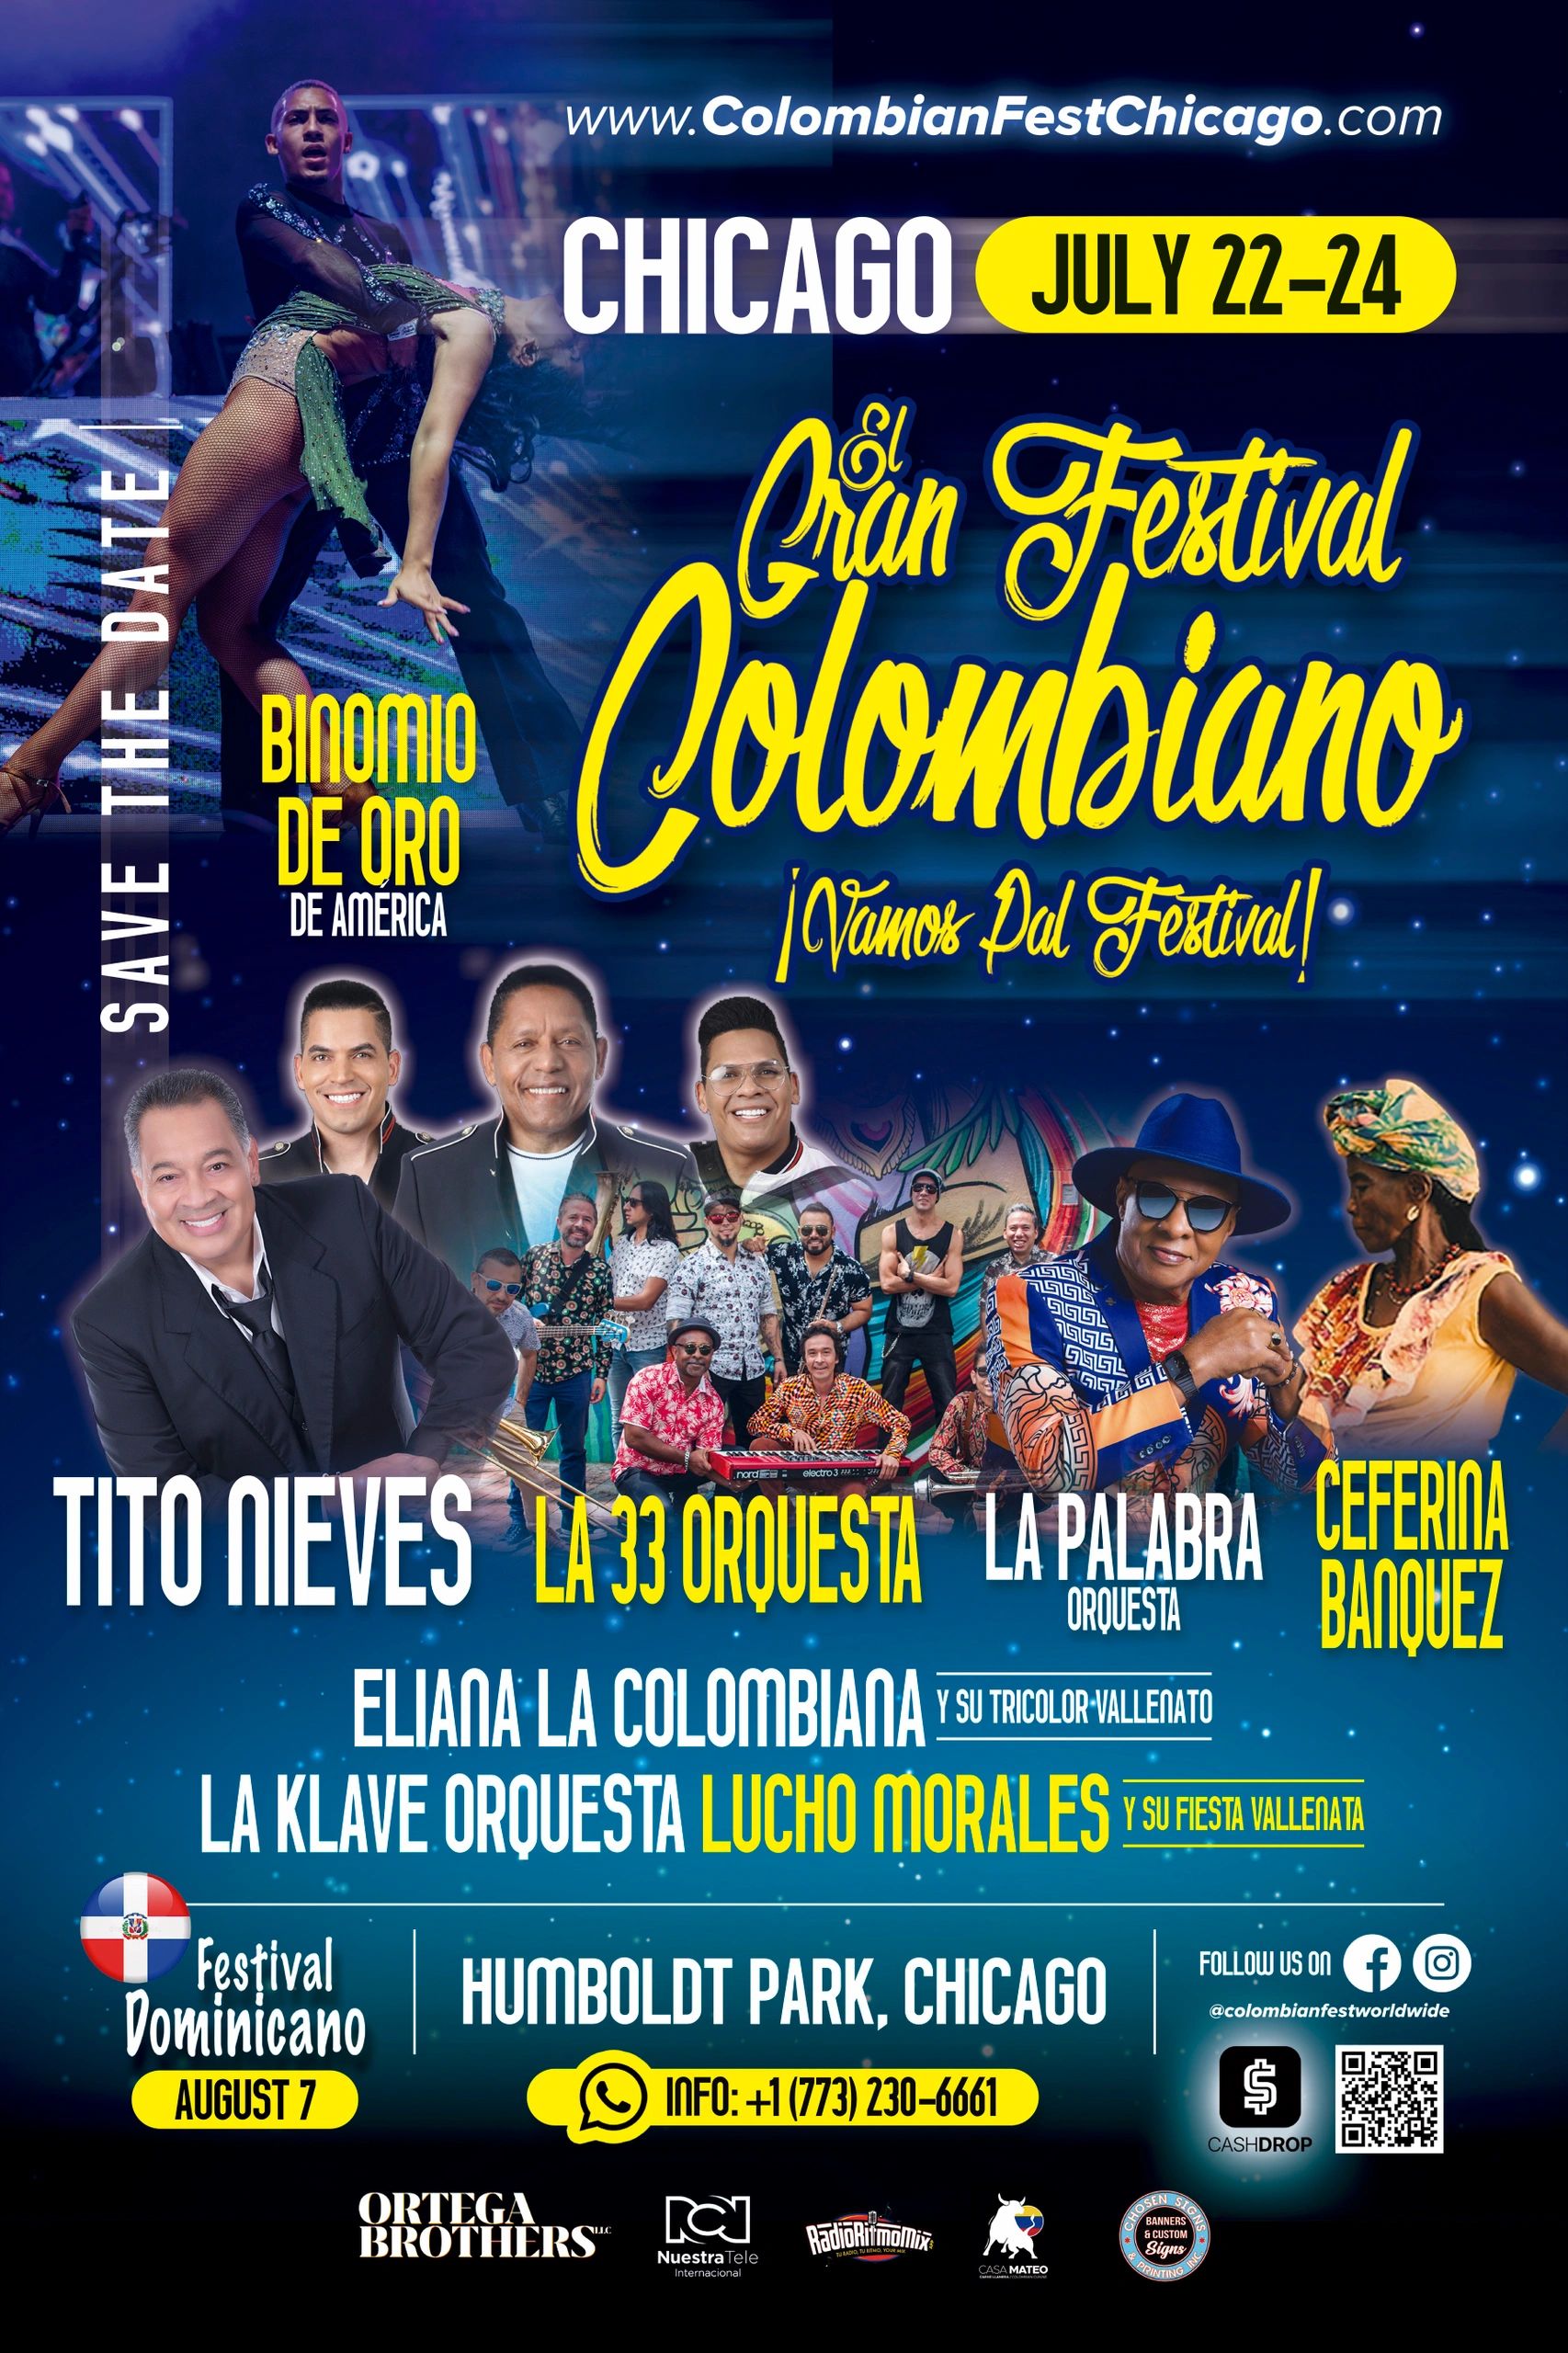 First Wave of Artists announced for Chicago's Colombian Fest 2022